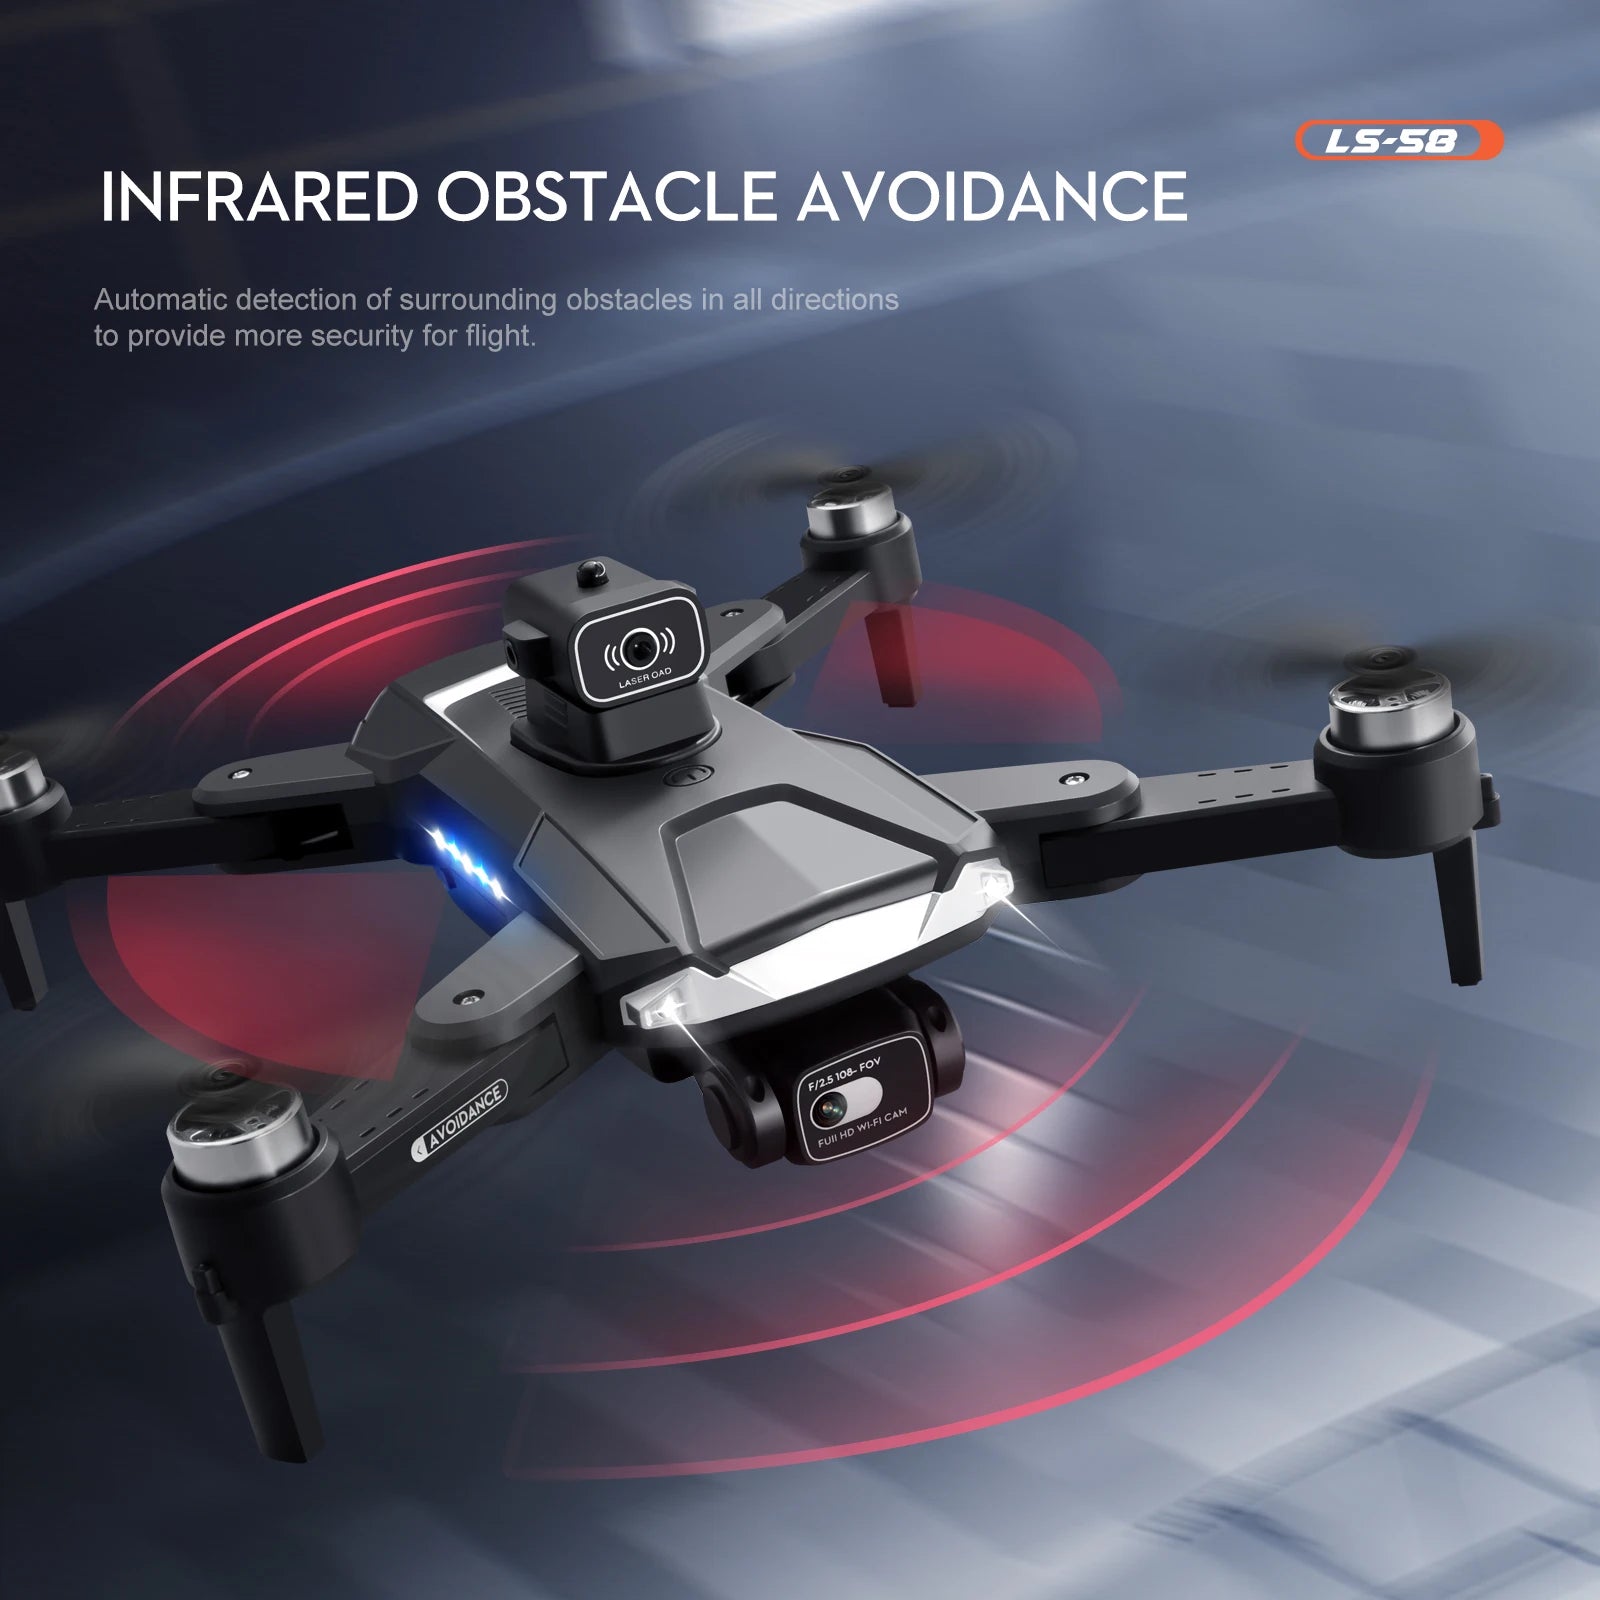 LS58 Drone, ls-5d infrared obstacle avoidance automatic detection